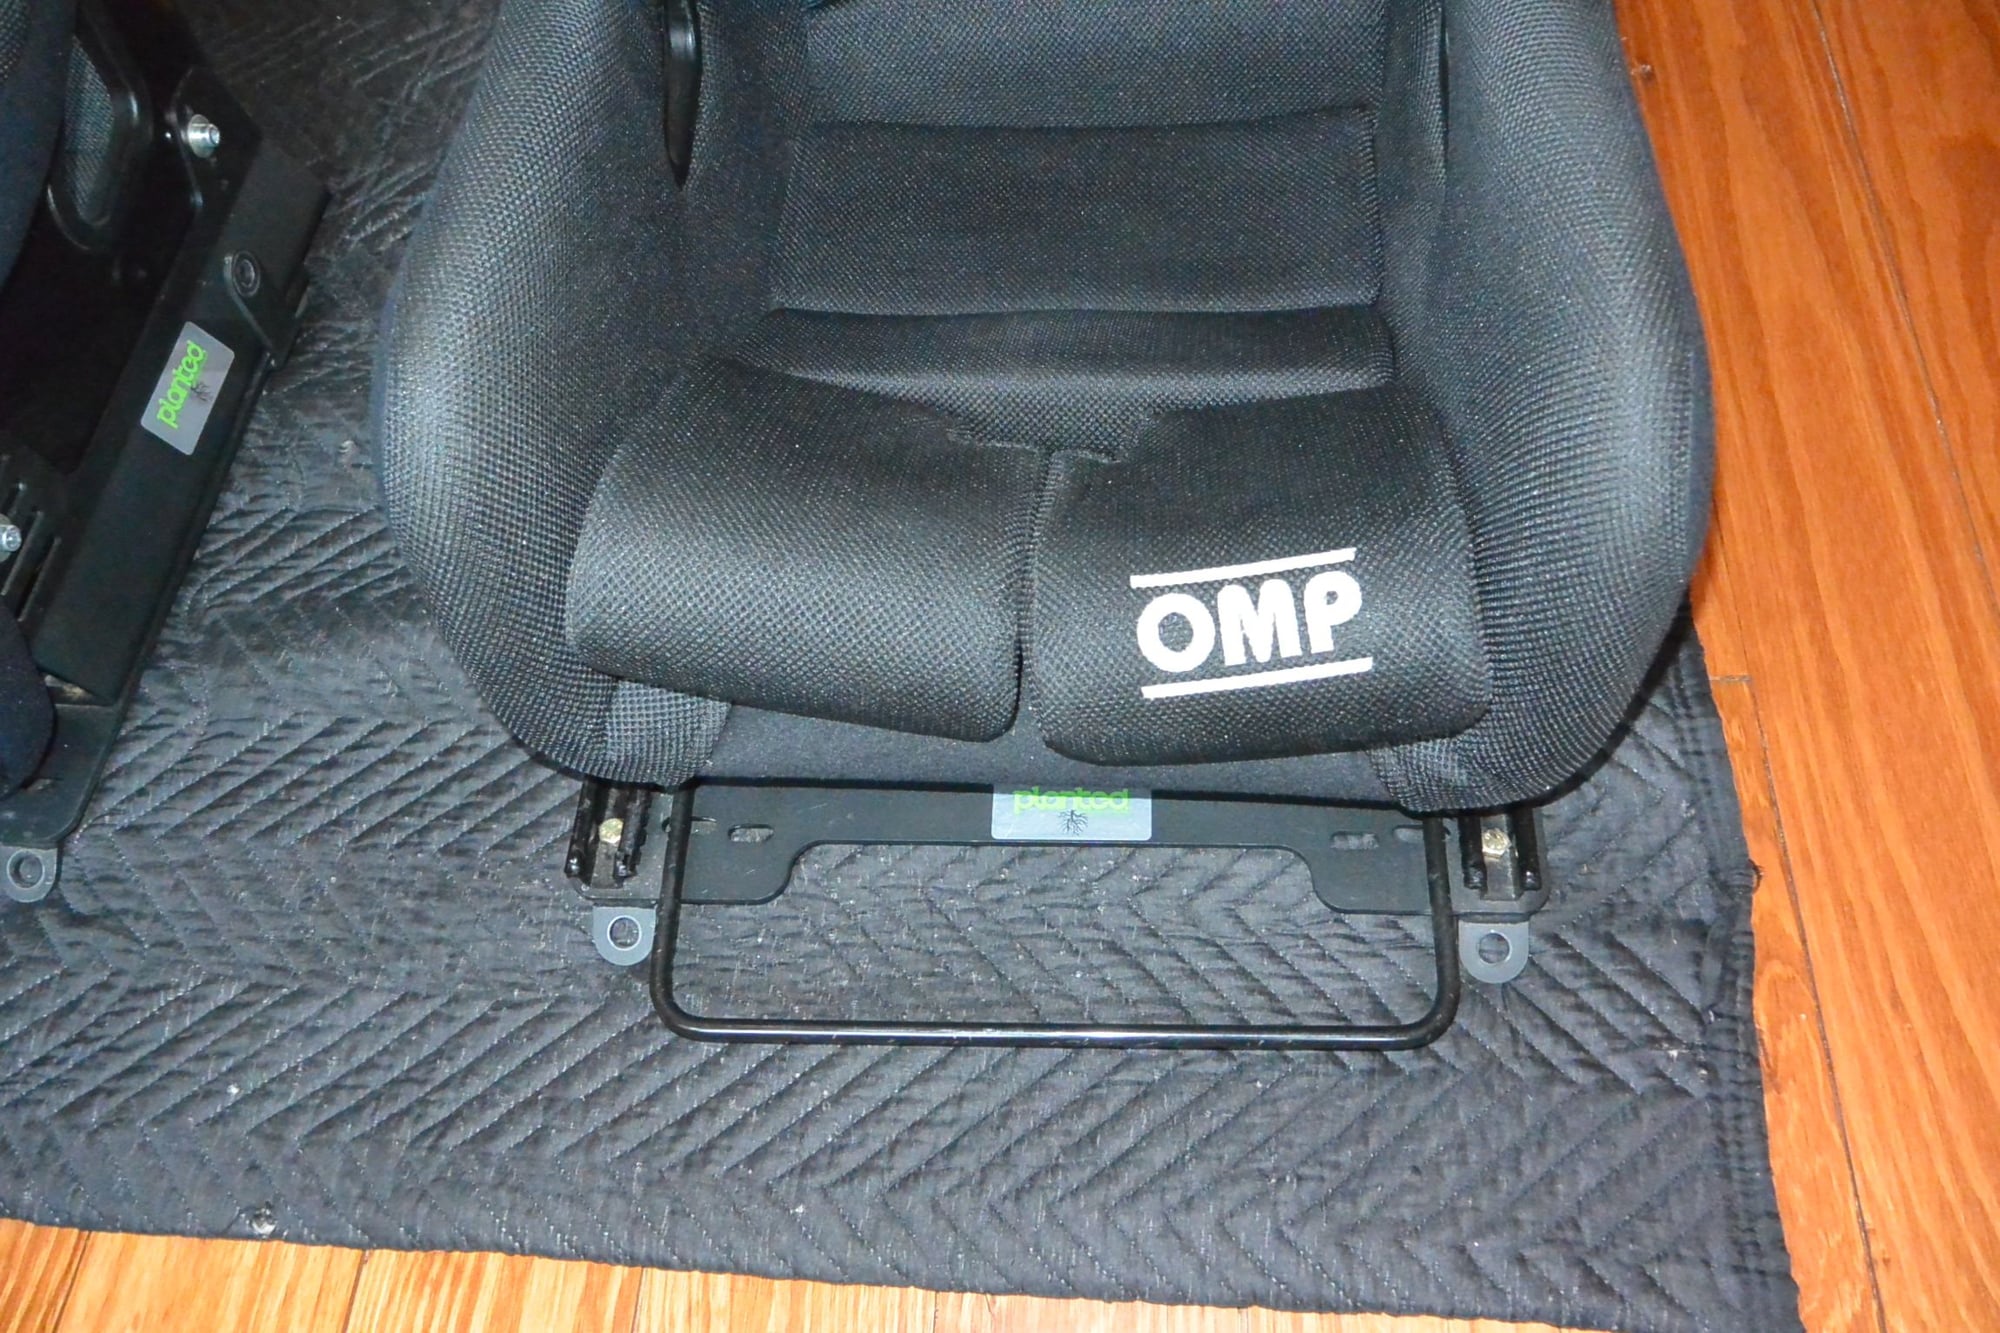 Interior/Upholstery - OMP WRC Race Seats + Planted Seat Brackets for 996/997/991/Boxster/Cayman - ship incl - Used - 2004 to 2019 Porsche GT3 - 1999 to 2019 Porsche 911 - 1999 to 2019 Porsche Boxster - 1999 to 2019 Porsche Cayman - Cheyenne, WY 82009, United States